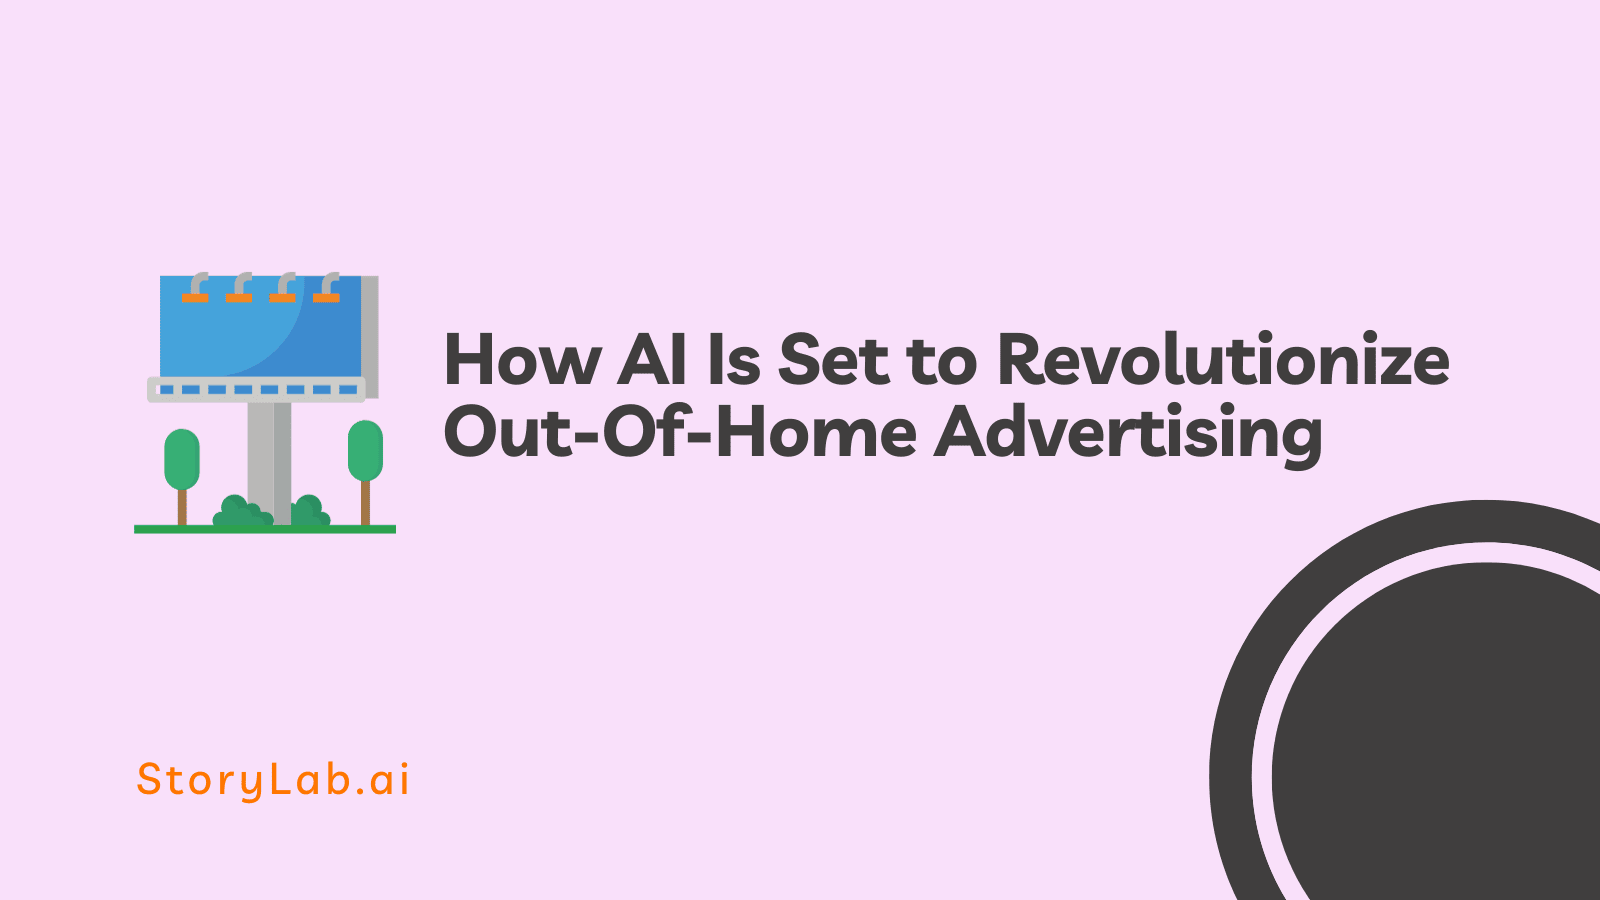 How AI Is Set to Revolutionize Out-Of-Home Advertising